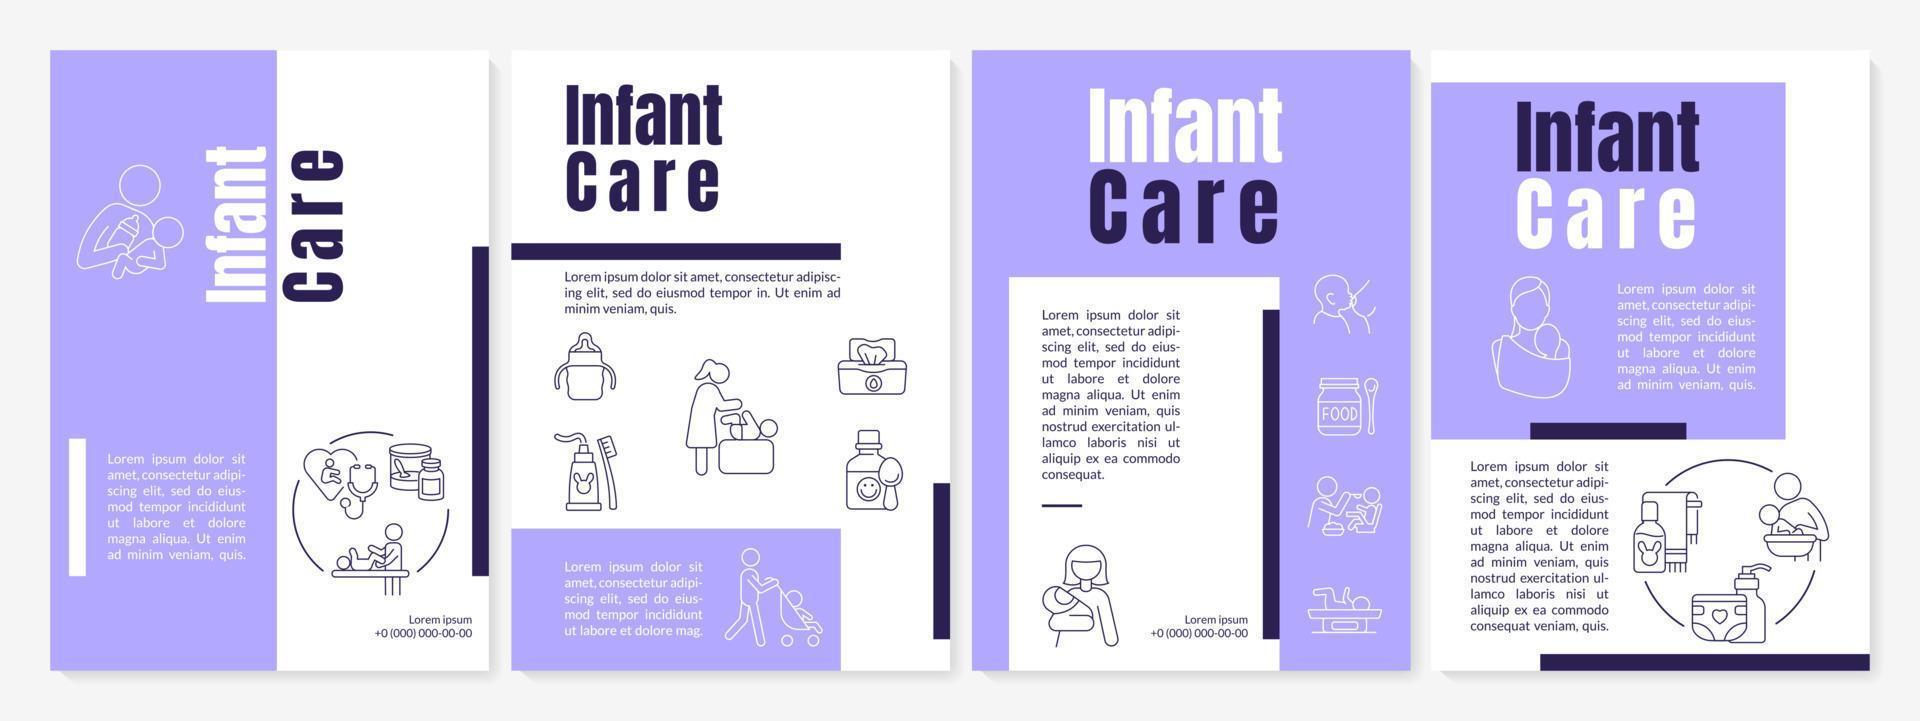 Infant care purple brochure template. Baby health care. Flyer, booklet, leaflet print, cover design with linear icons. Vector layouts for presentation, annual reports, advertisement pages